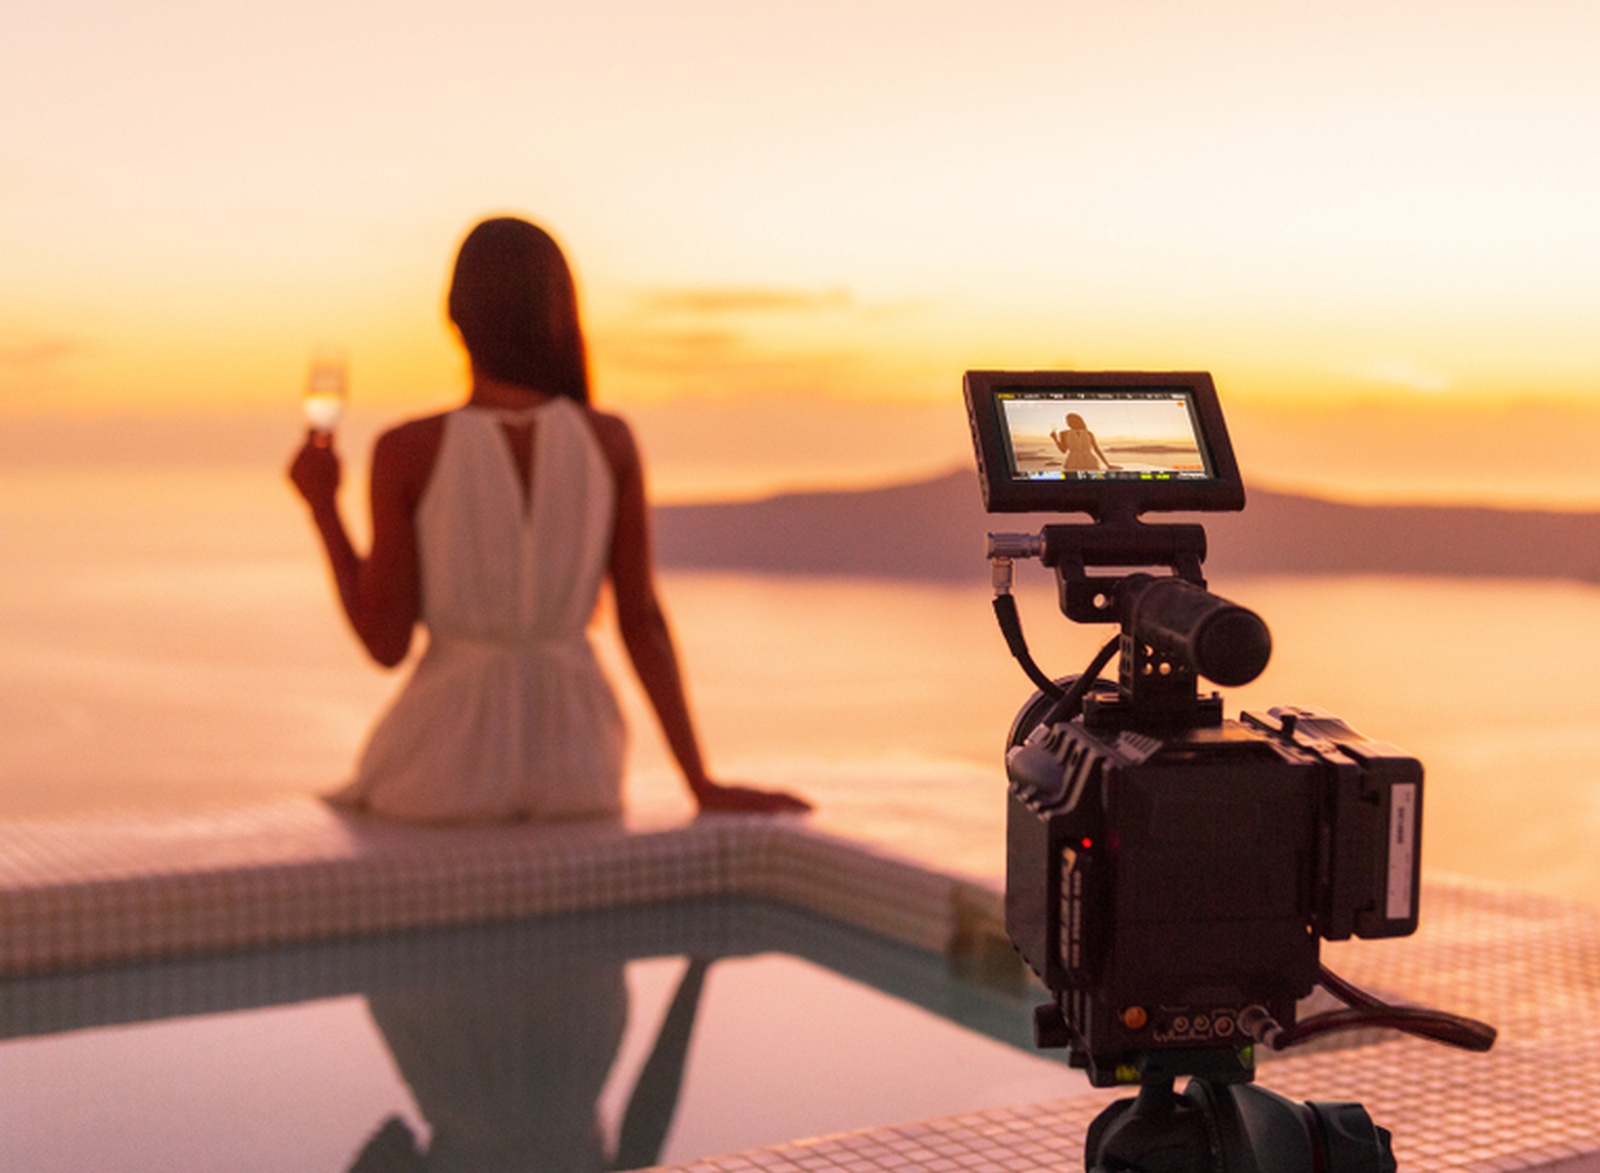 Corporate Video Production & Video Marketing for Businesses in Virginia Beach, Virginia